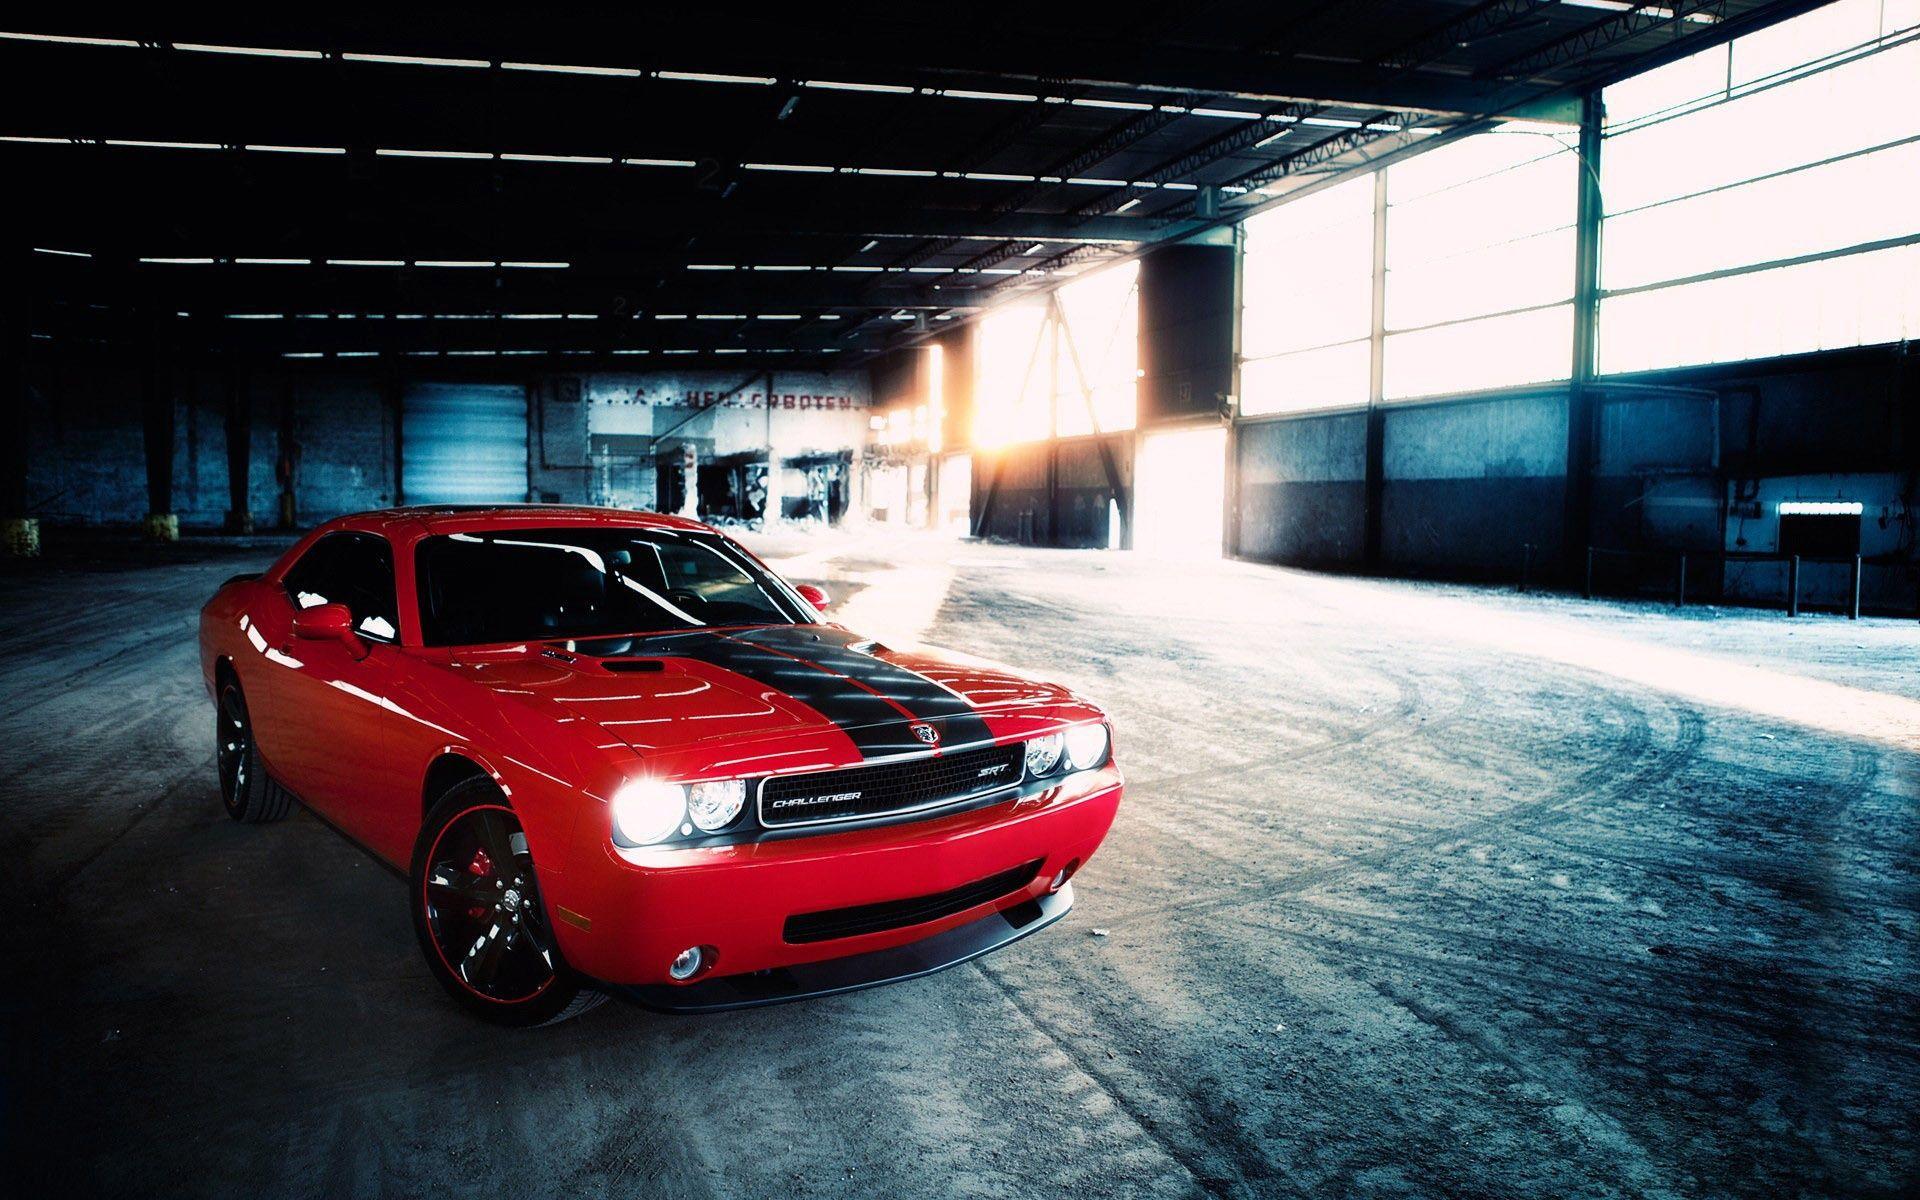 Dodge demon wallpaper for free download about (38) wallpaper